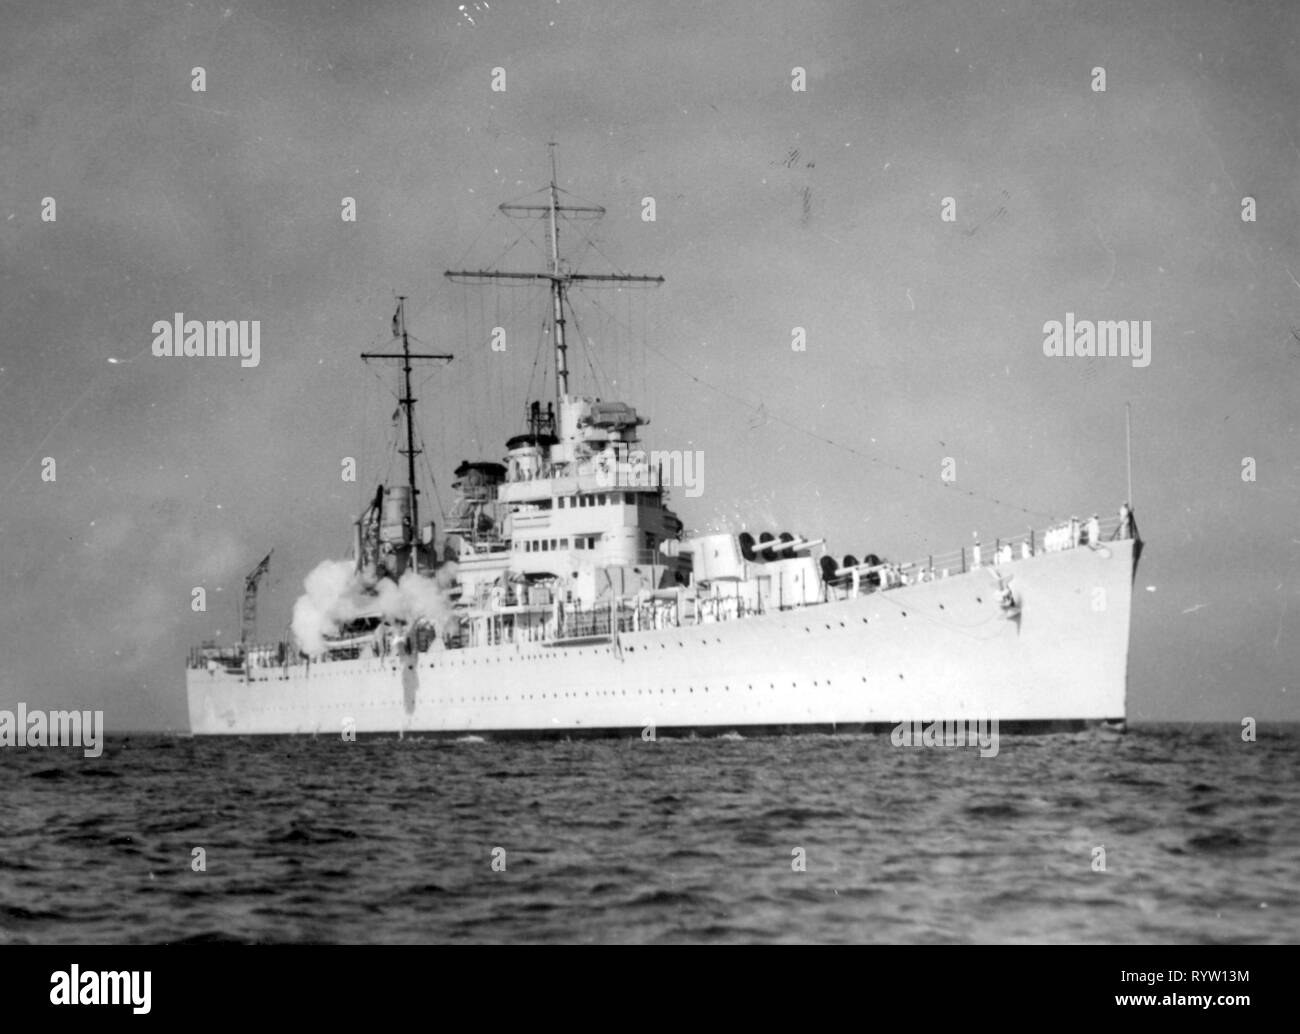 transport / transportation, navigation, warship, light cruiser USS Nashville before Rio de Janeiro, Brazil, 25.5.1939, US navy, United States Navy, USA, United States of America, man-of-war, CL-43, CL43, CL 43, Brooklyn-Class, Brooklyn class, ships, ship, steamship, steamships, military, armed forces, naval forces, 1930s, 30s, 20th century, transport, transportation, warship, warships, cruiser, cruisers, historic, historical, Additional-Rights-Clearance-Info-Not-Available Stock Photo